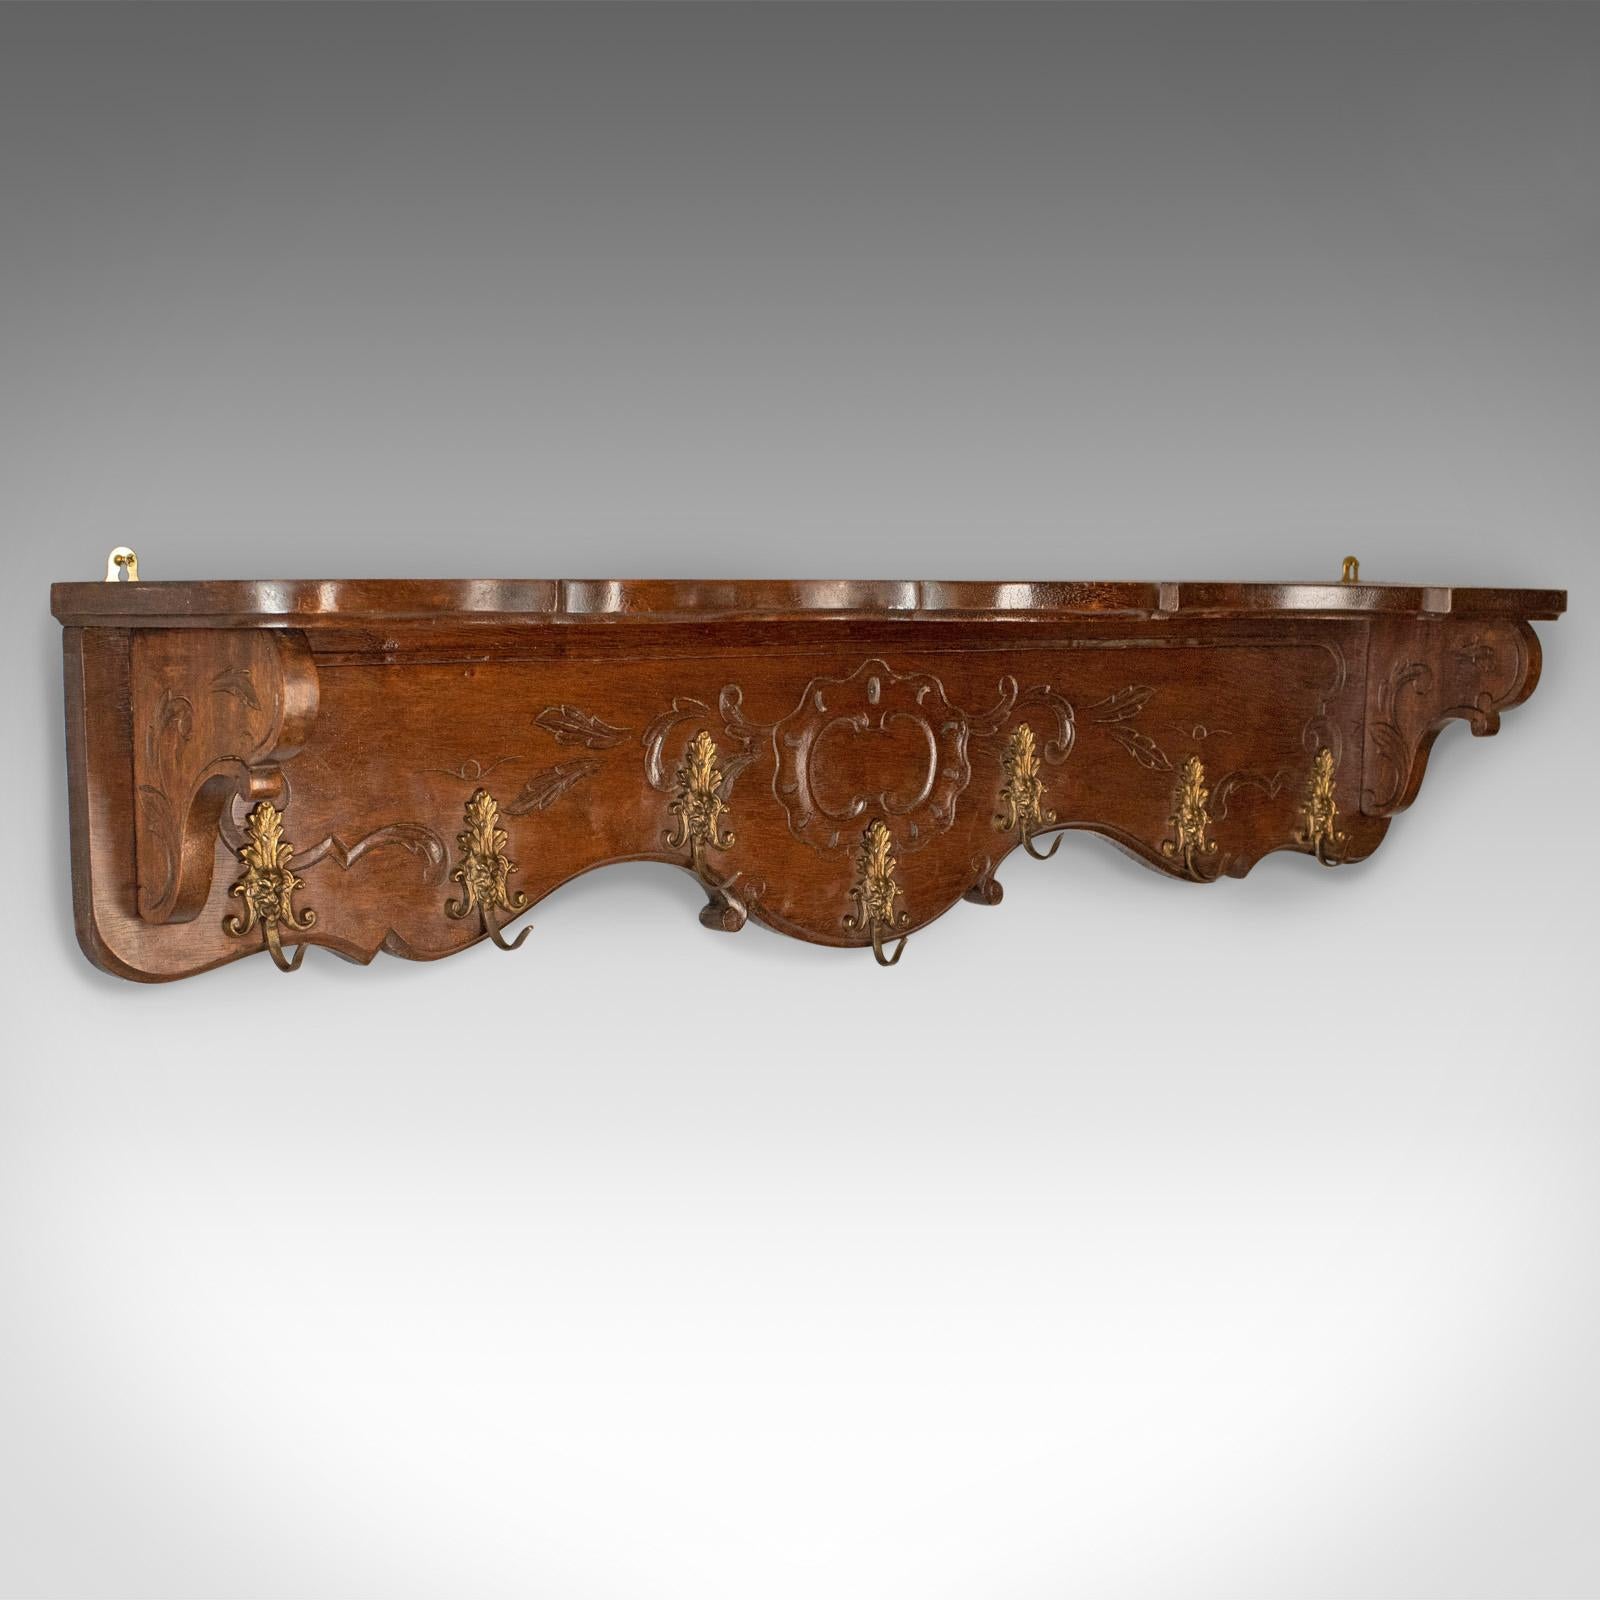 This is an antique set of coat hooks, an English, Edwardian, wall mounted hall shelf in walnut dating to the early 20th century, circa 1910.

Broad, of serpentine form and useful proportions
In stout stocks of walnut displaying good colour